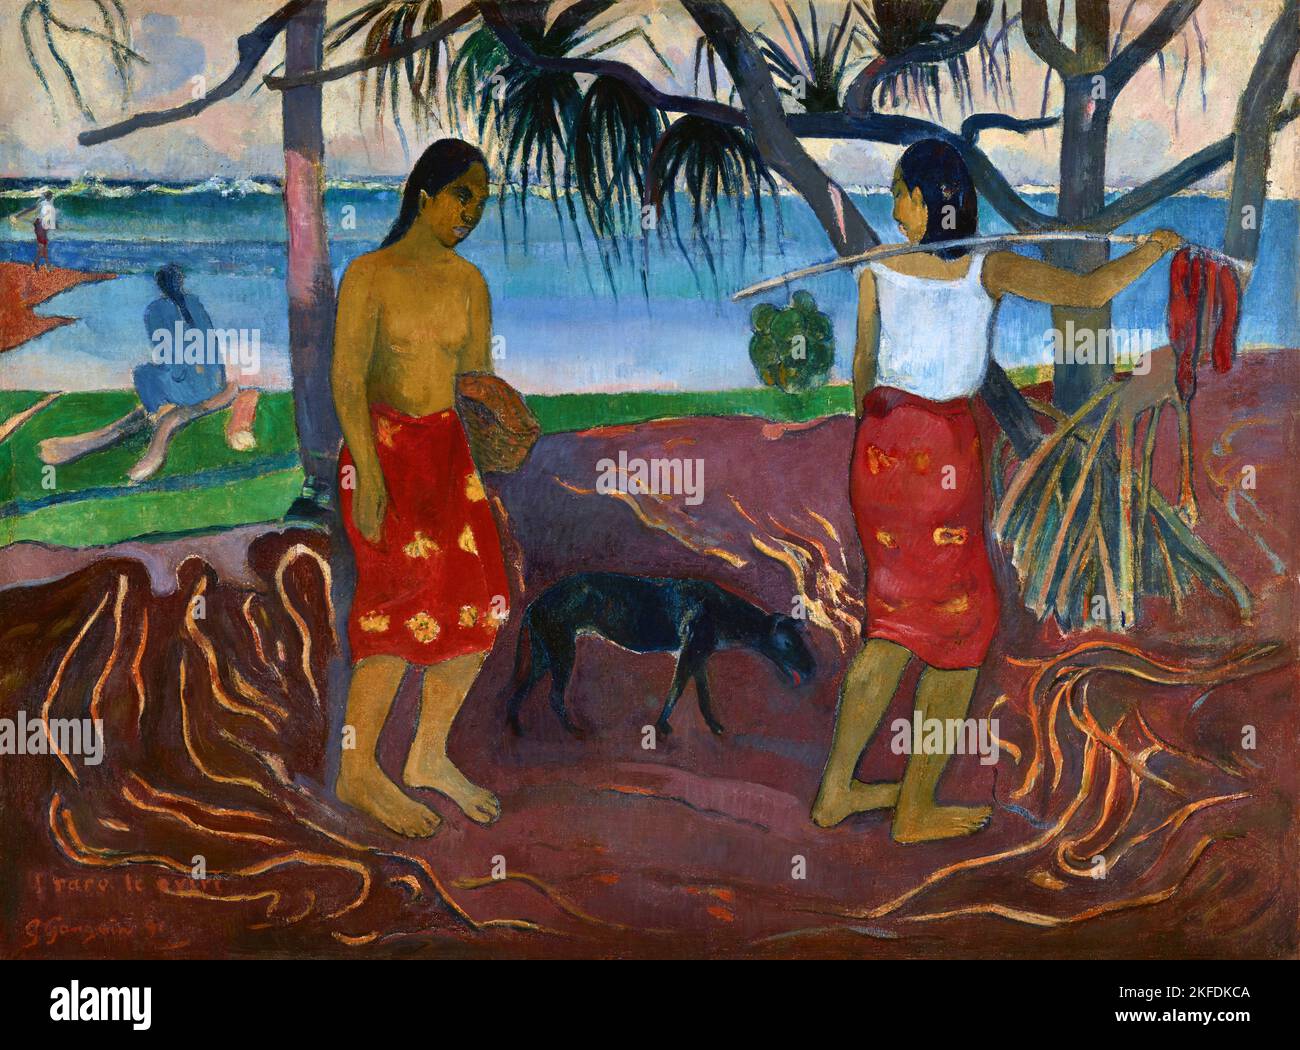 Tahiti: 'I Raro Te Oviri' (Under the Pandanus). Oil on canvas painting by Paul Gauguin (7 June 1848 - 8 May 1903), 1891.  Paul Gauguin was born in Paris in 1848 and spent some of his childhood in Peru. He worked as a stockbroker with little success, and suffered from bouts of severe depression. He also painted. In 1891, Gauguin, frustrated by lack of recognition at home and financially destitute, sailed to the tropics to escape European civilization and 'everything that is artificial and conventional'. His time there was the subject of much interest both then and in modern times. Stock Photo